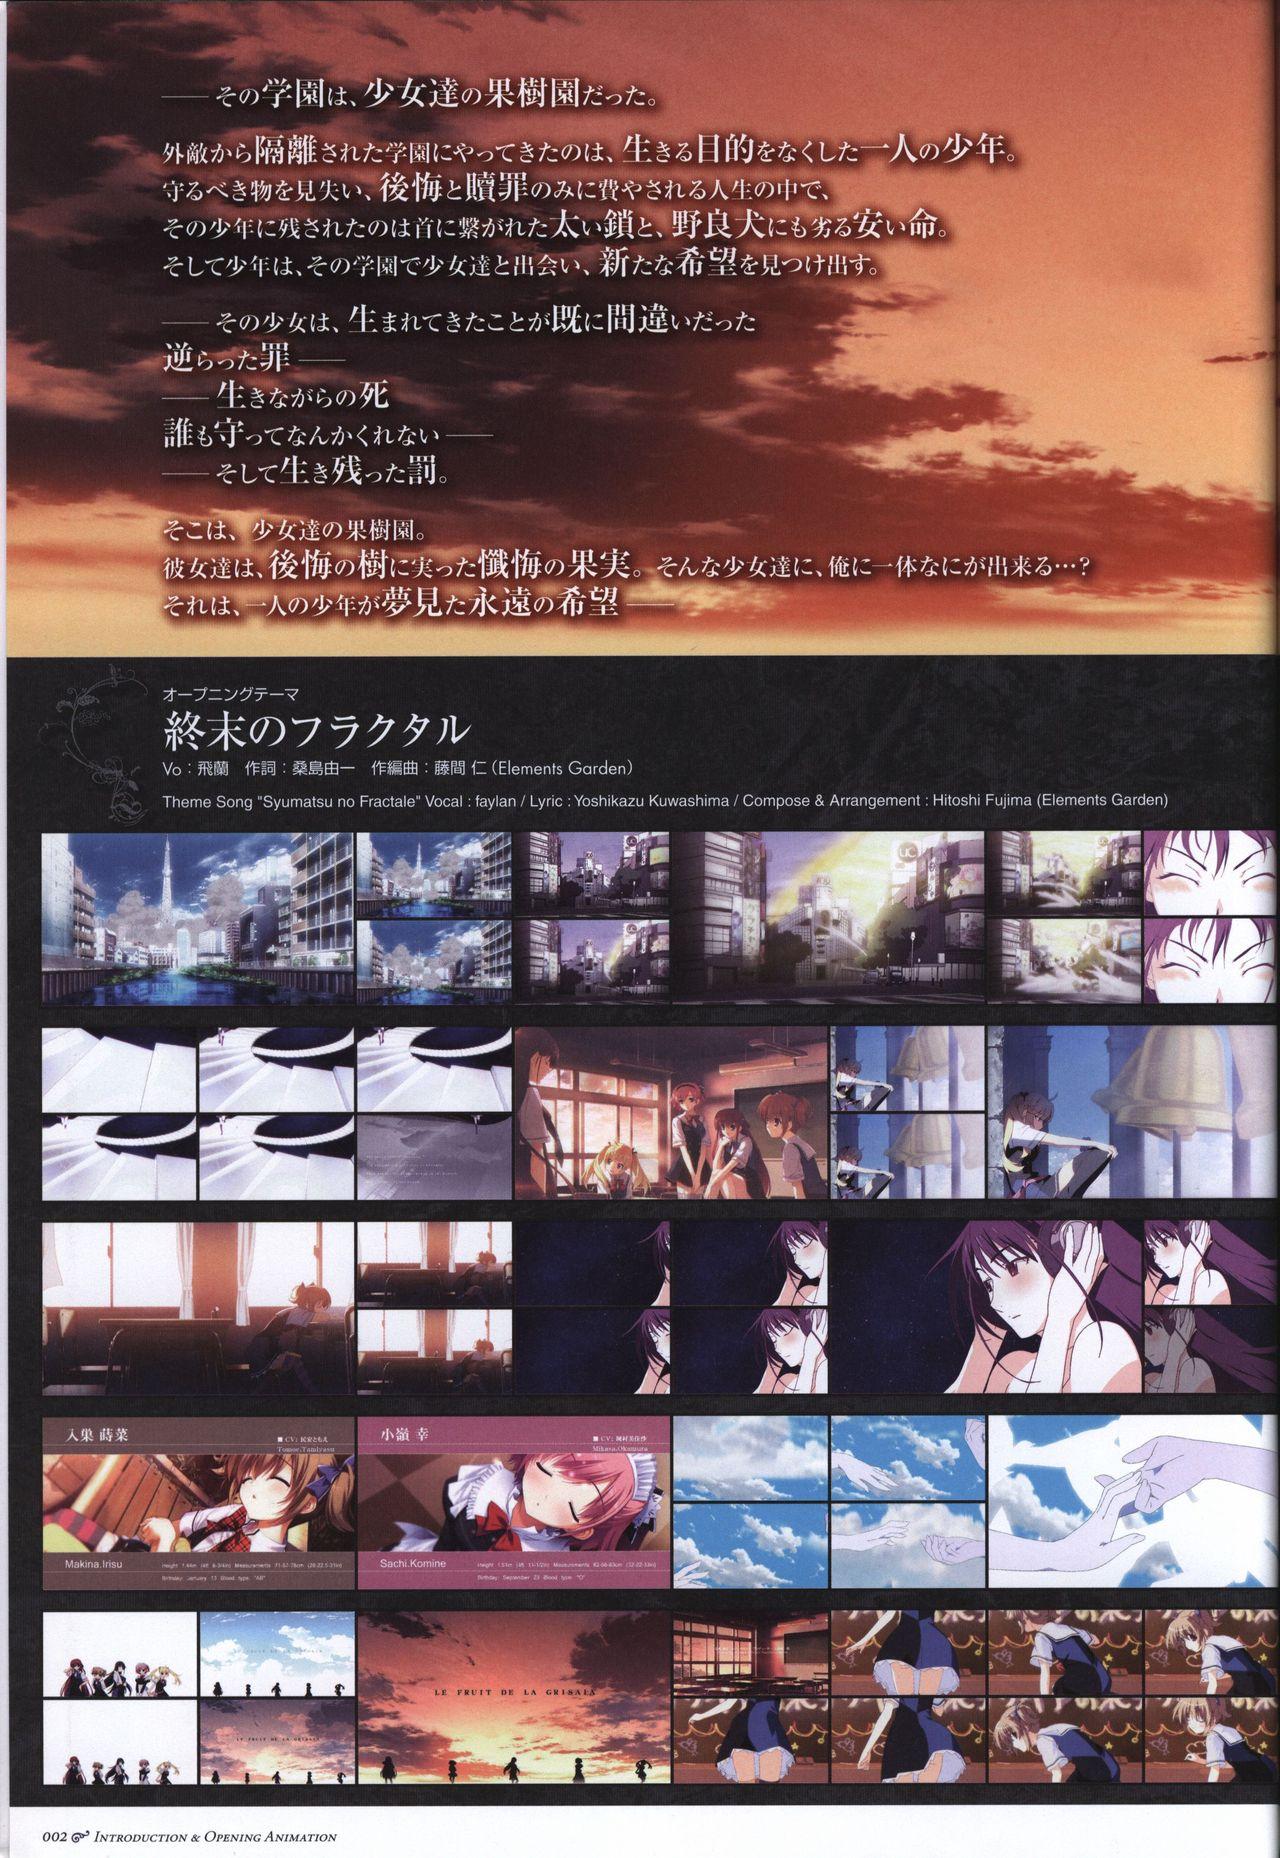 The Fruit of Grisaia Visual FanBook 2